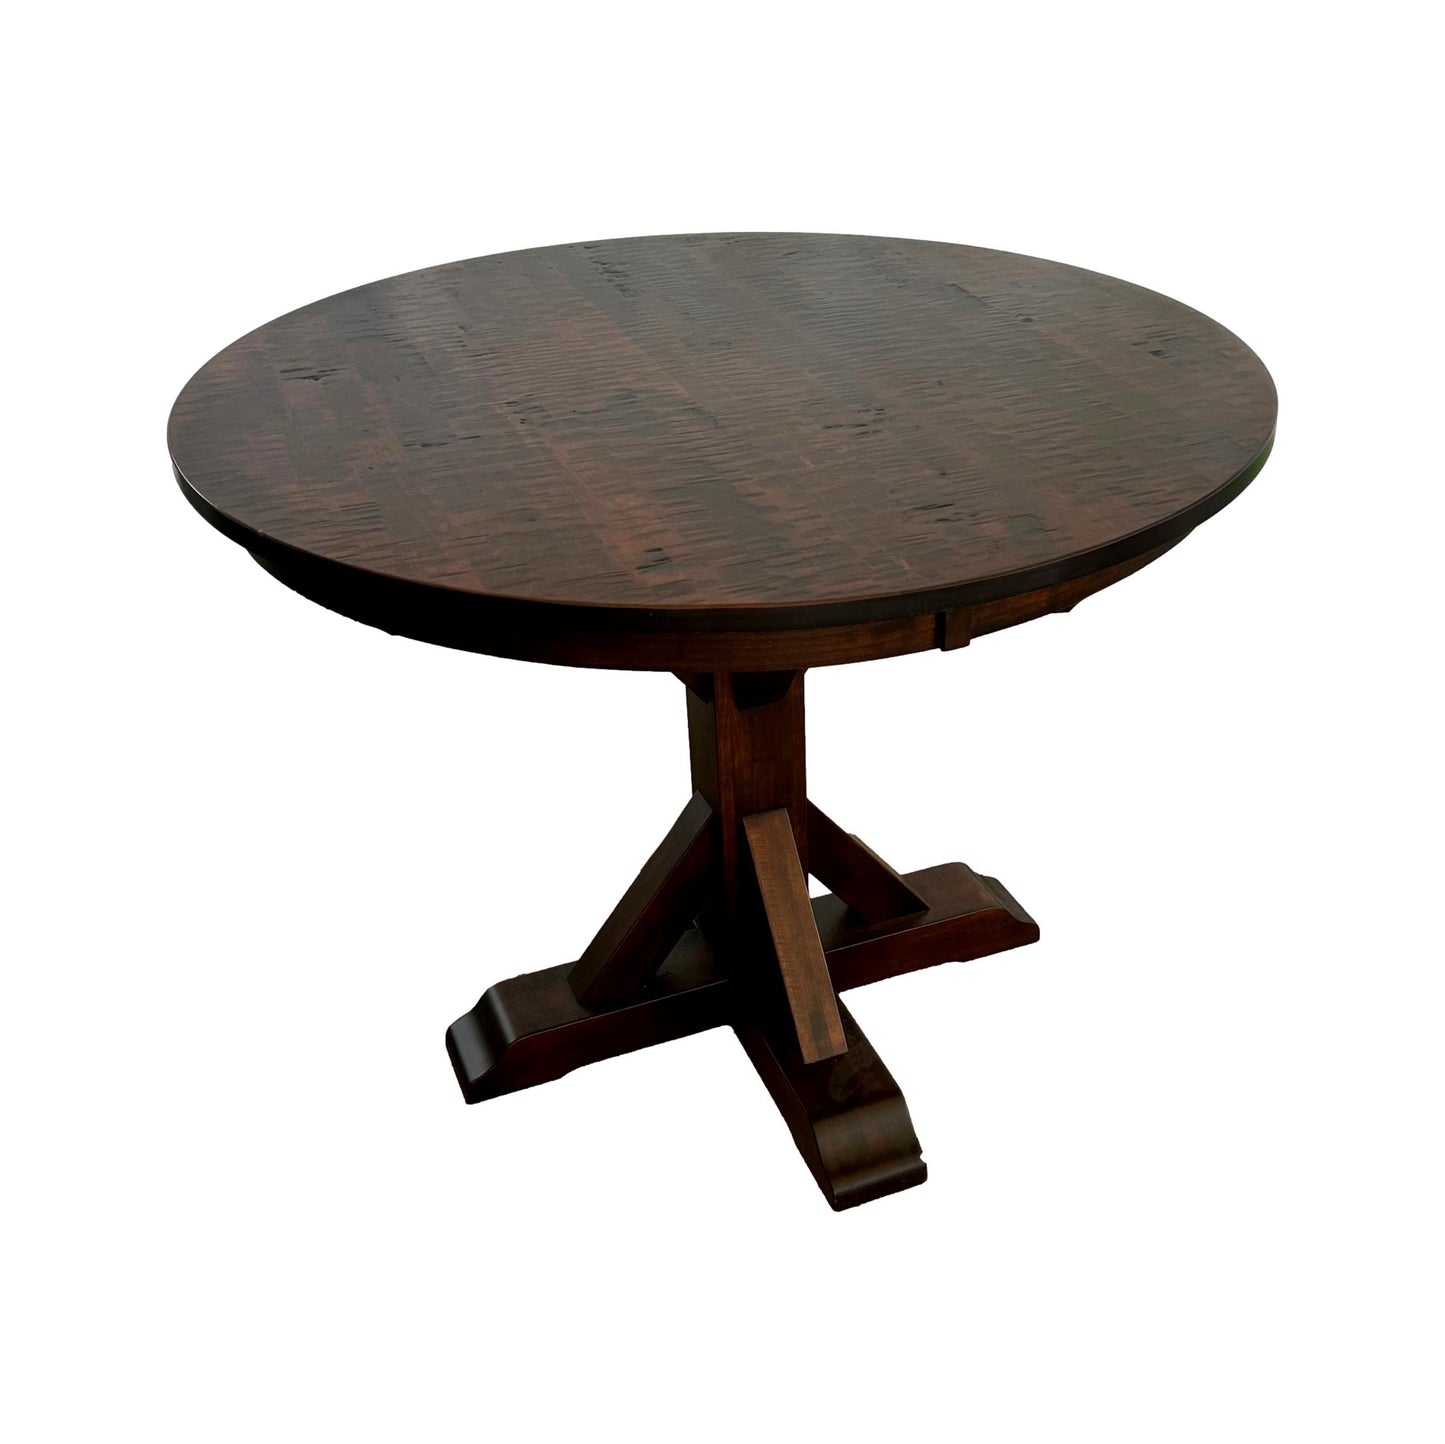 Round Bar Height Table With Bar Height Leather Seat Upholstered Chairs